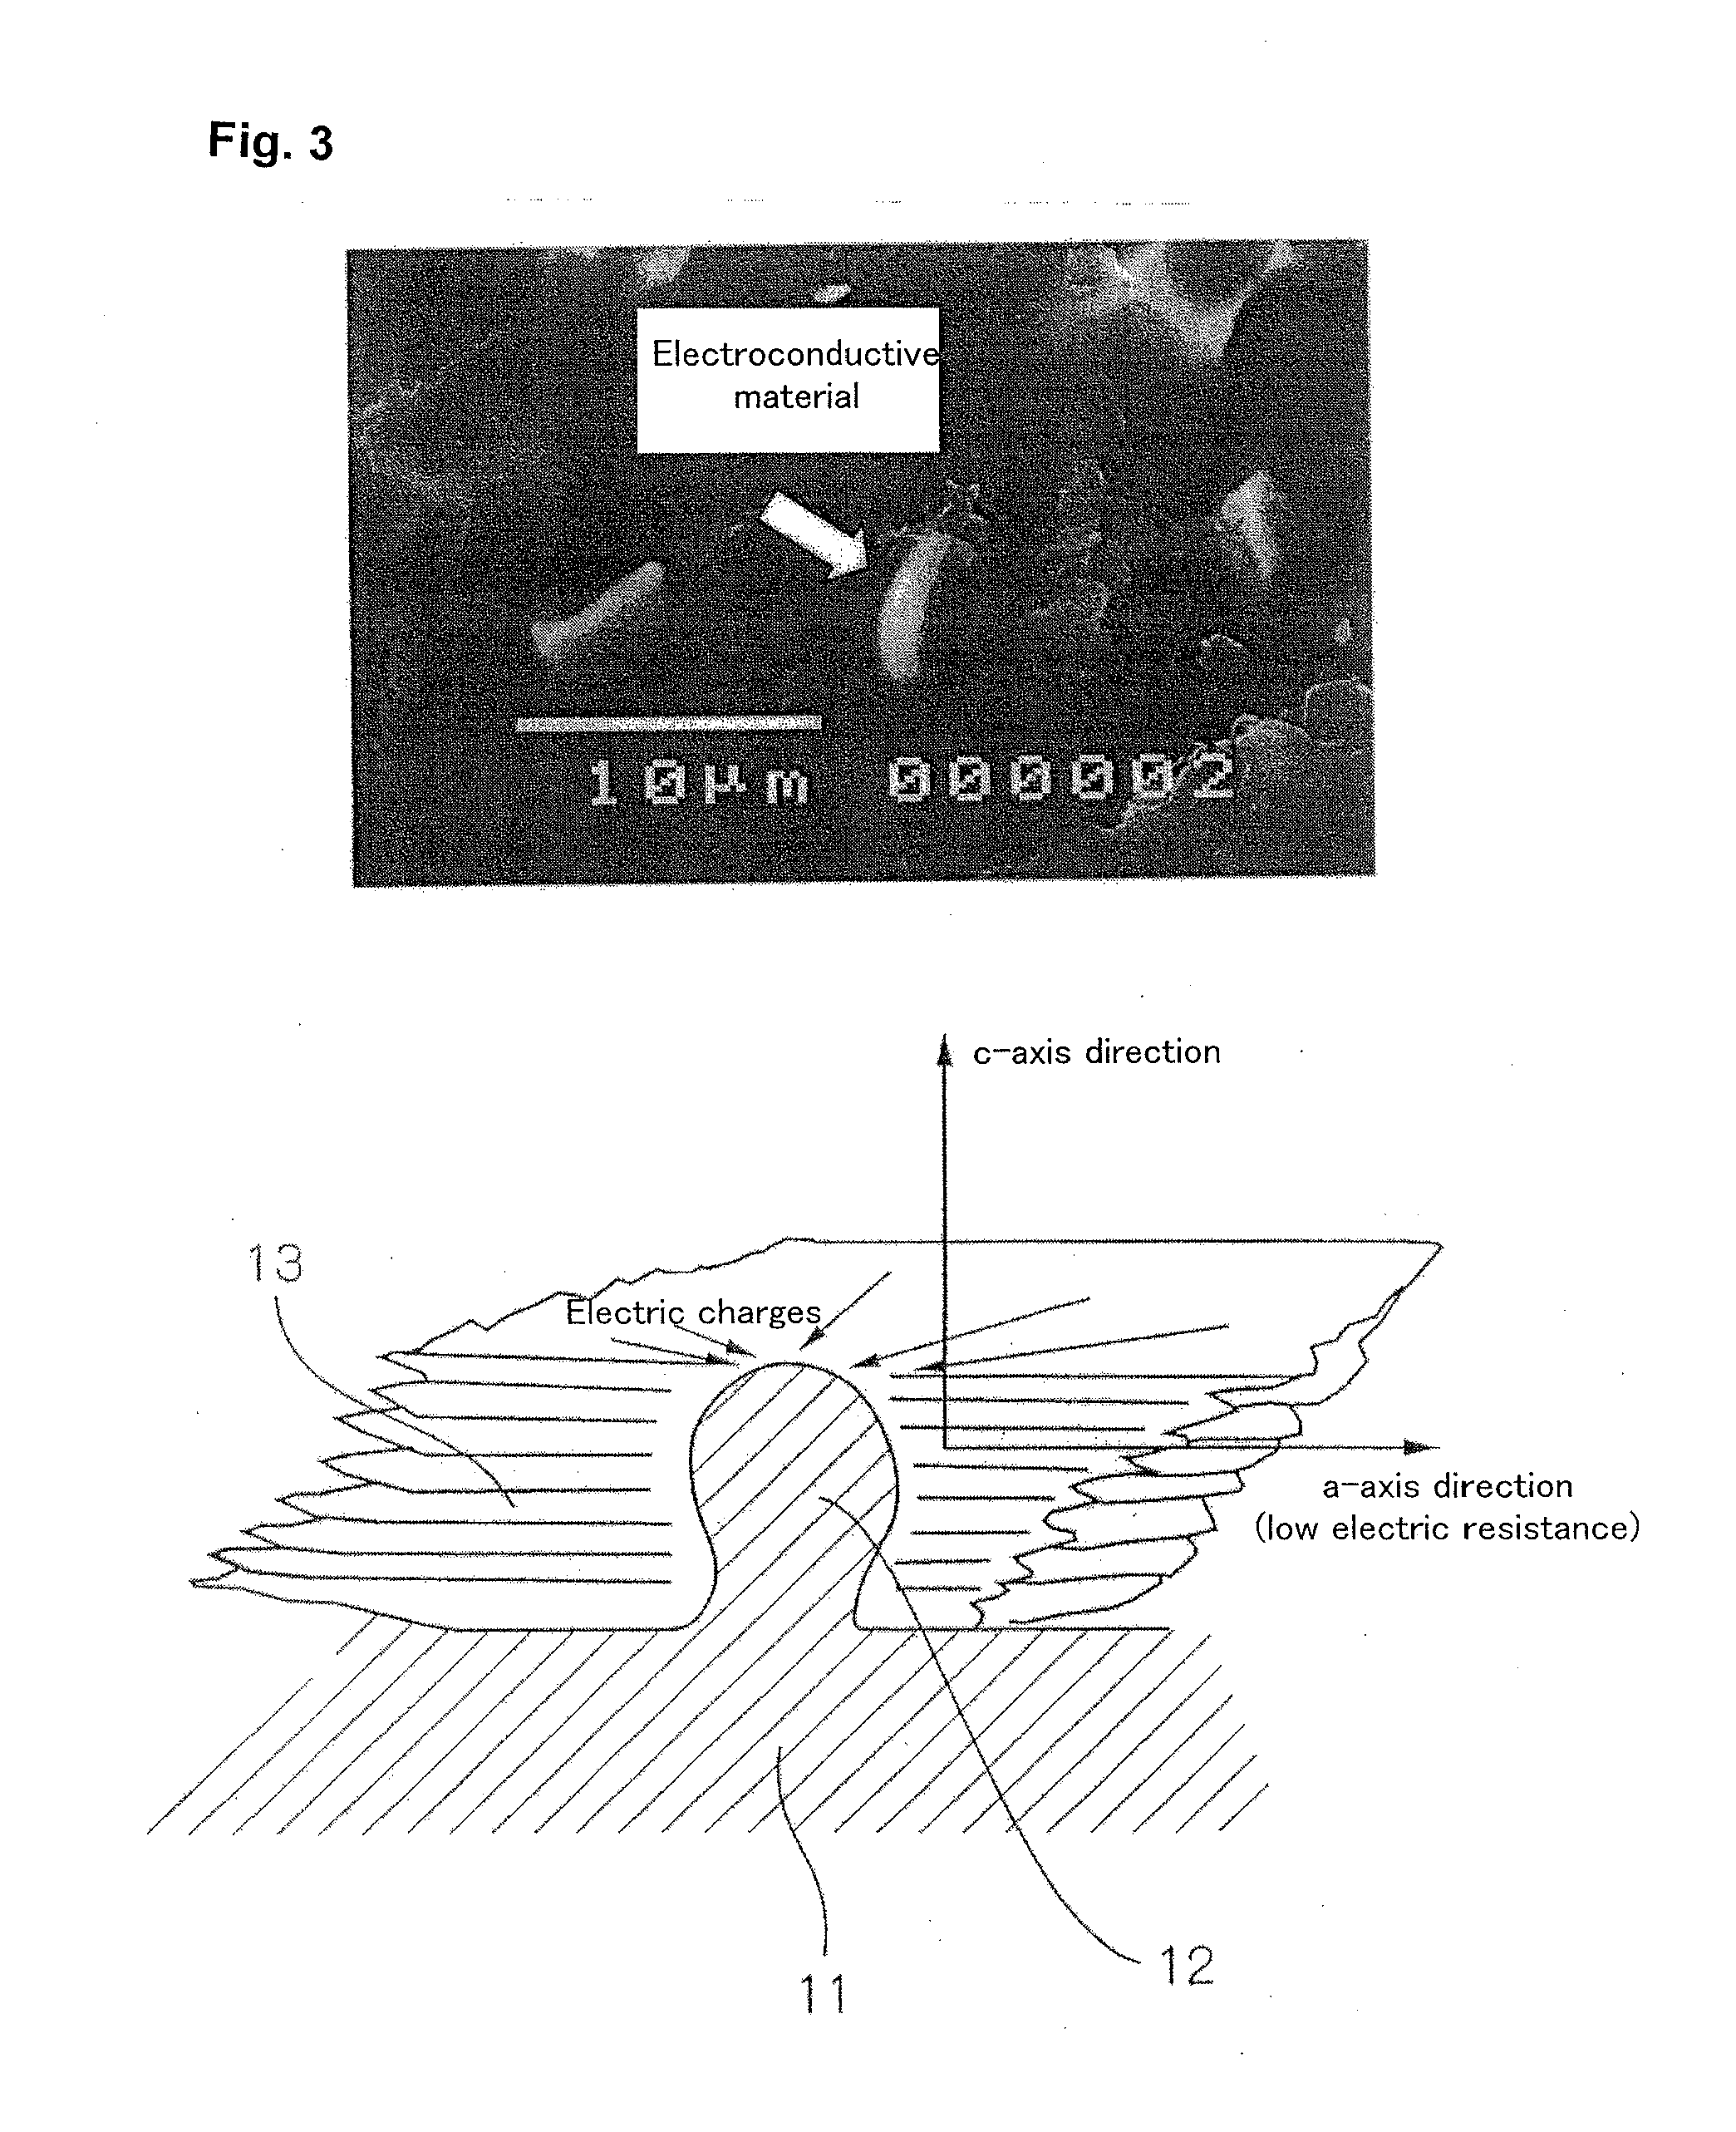 Stainless steel material for a separator of a solid polymer fuel cell and a solid polymer fuel cell using the separator